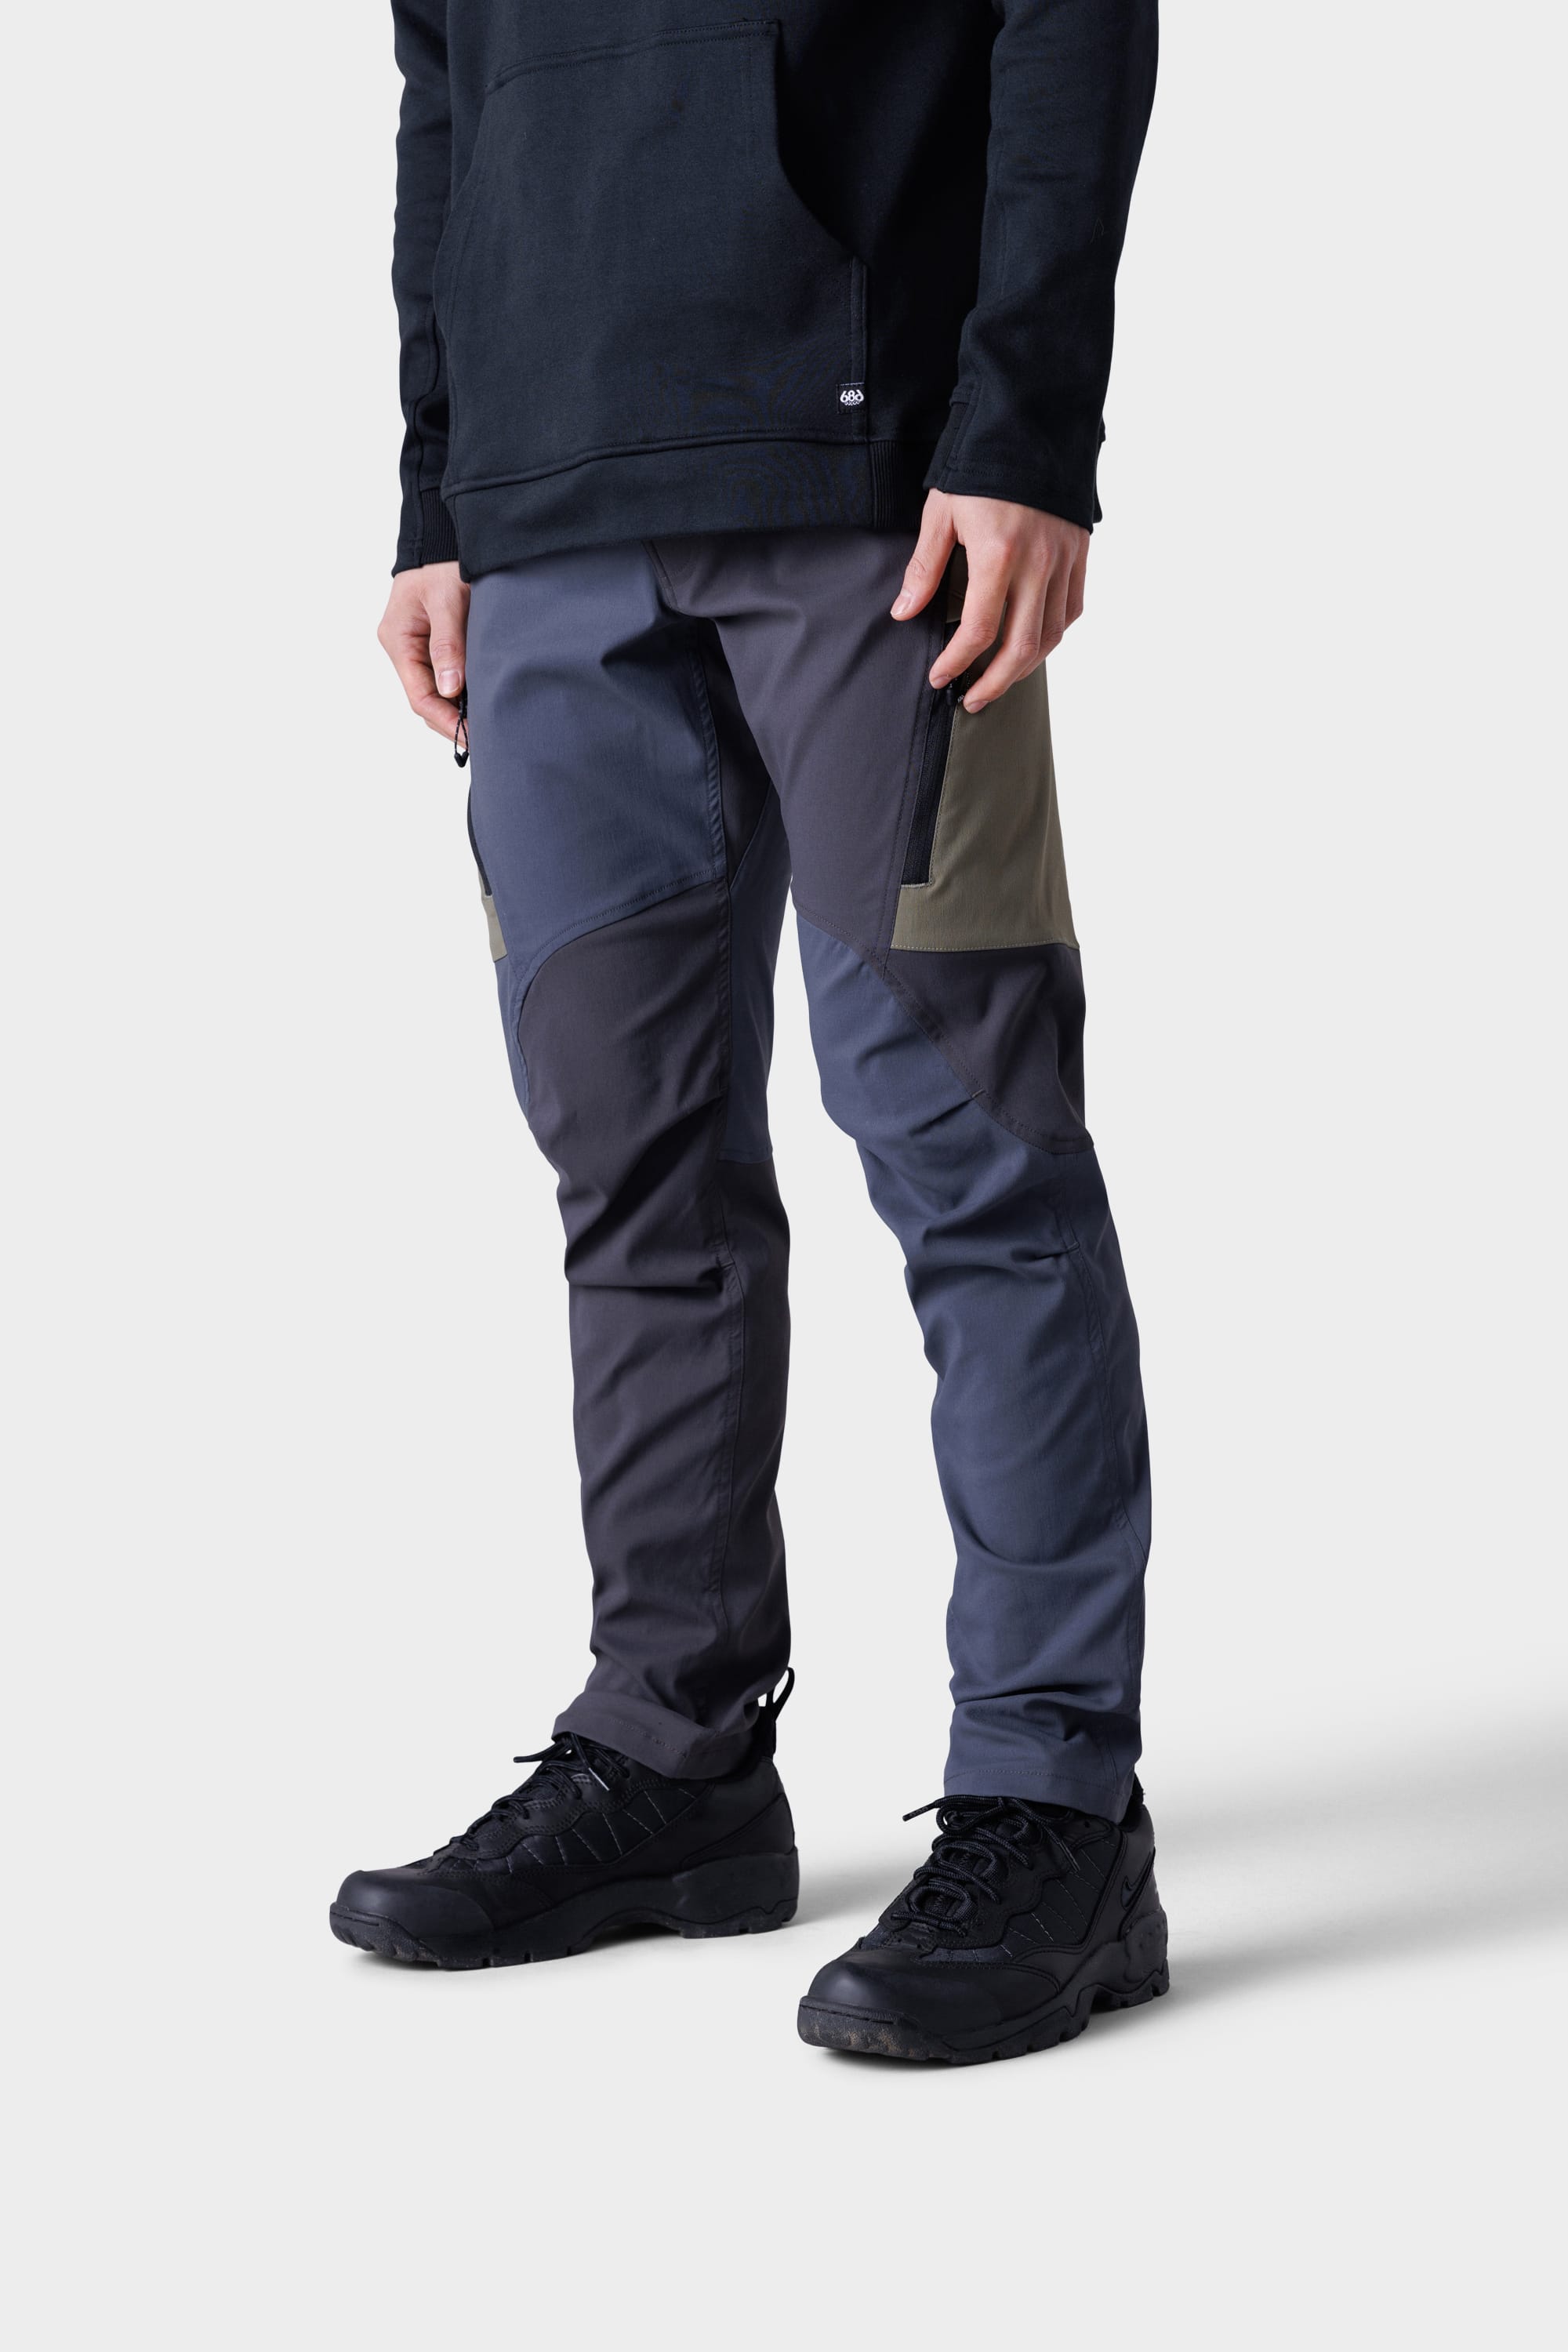 https://www.686.com/cdn/shop/products/1-686_AT_CARGO_PANT_SLIM_DUSTY_FATIGUE_CB_2296_f2663efd-182f-4f97-be62-f93be77ac5f7.jpg?v=1708030083&width=2000